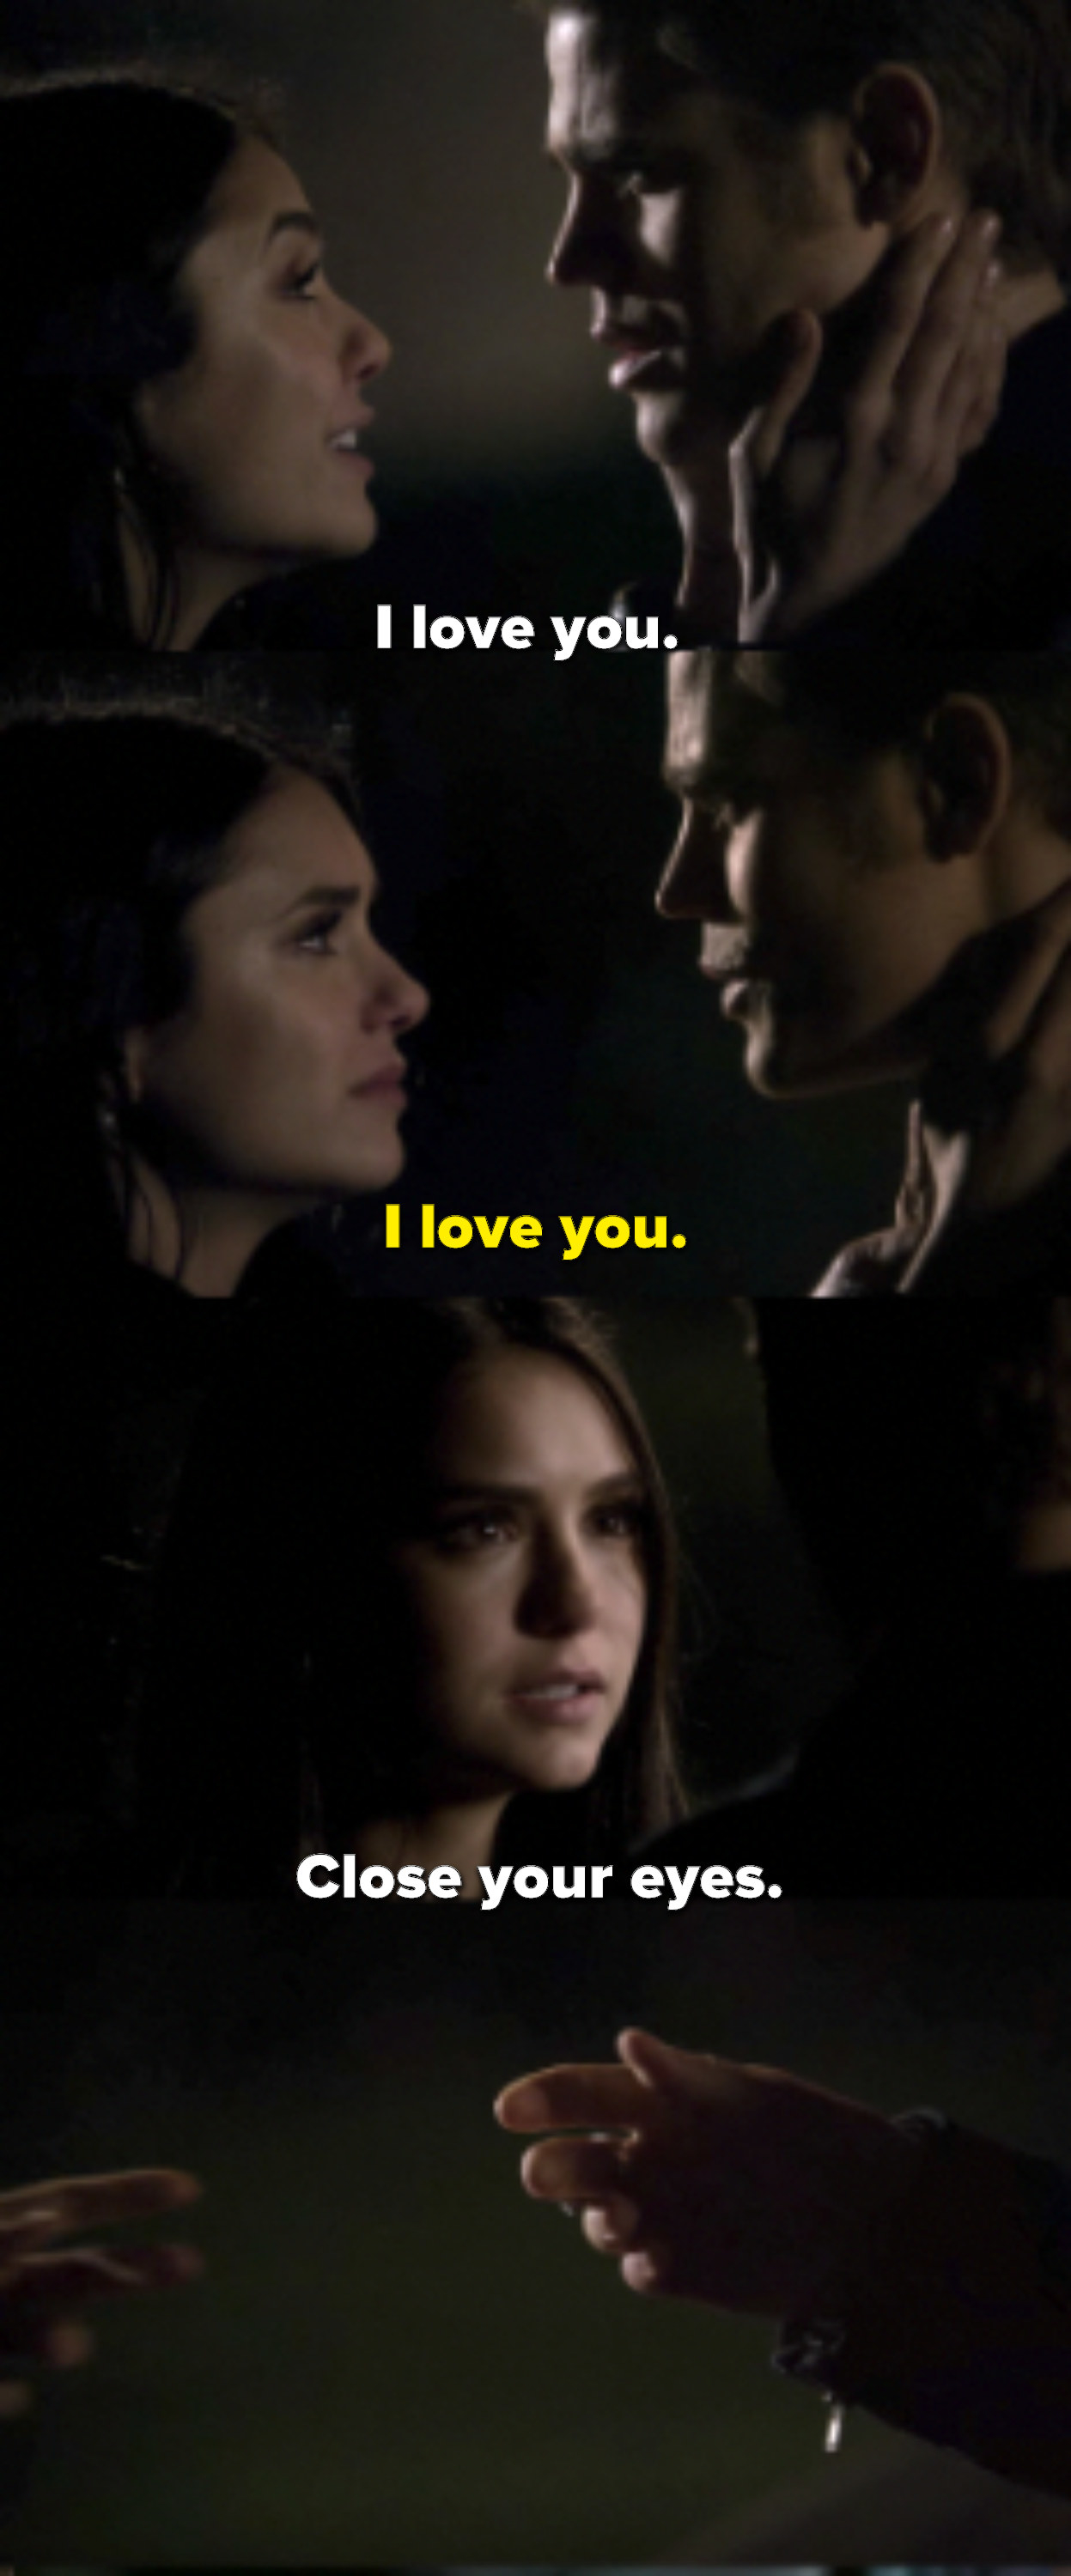 Elena and Stefan say they love each other, then Elena tells Stefan to close his eyes as she leaves with Klaus